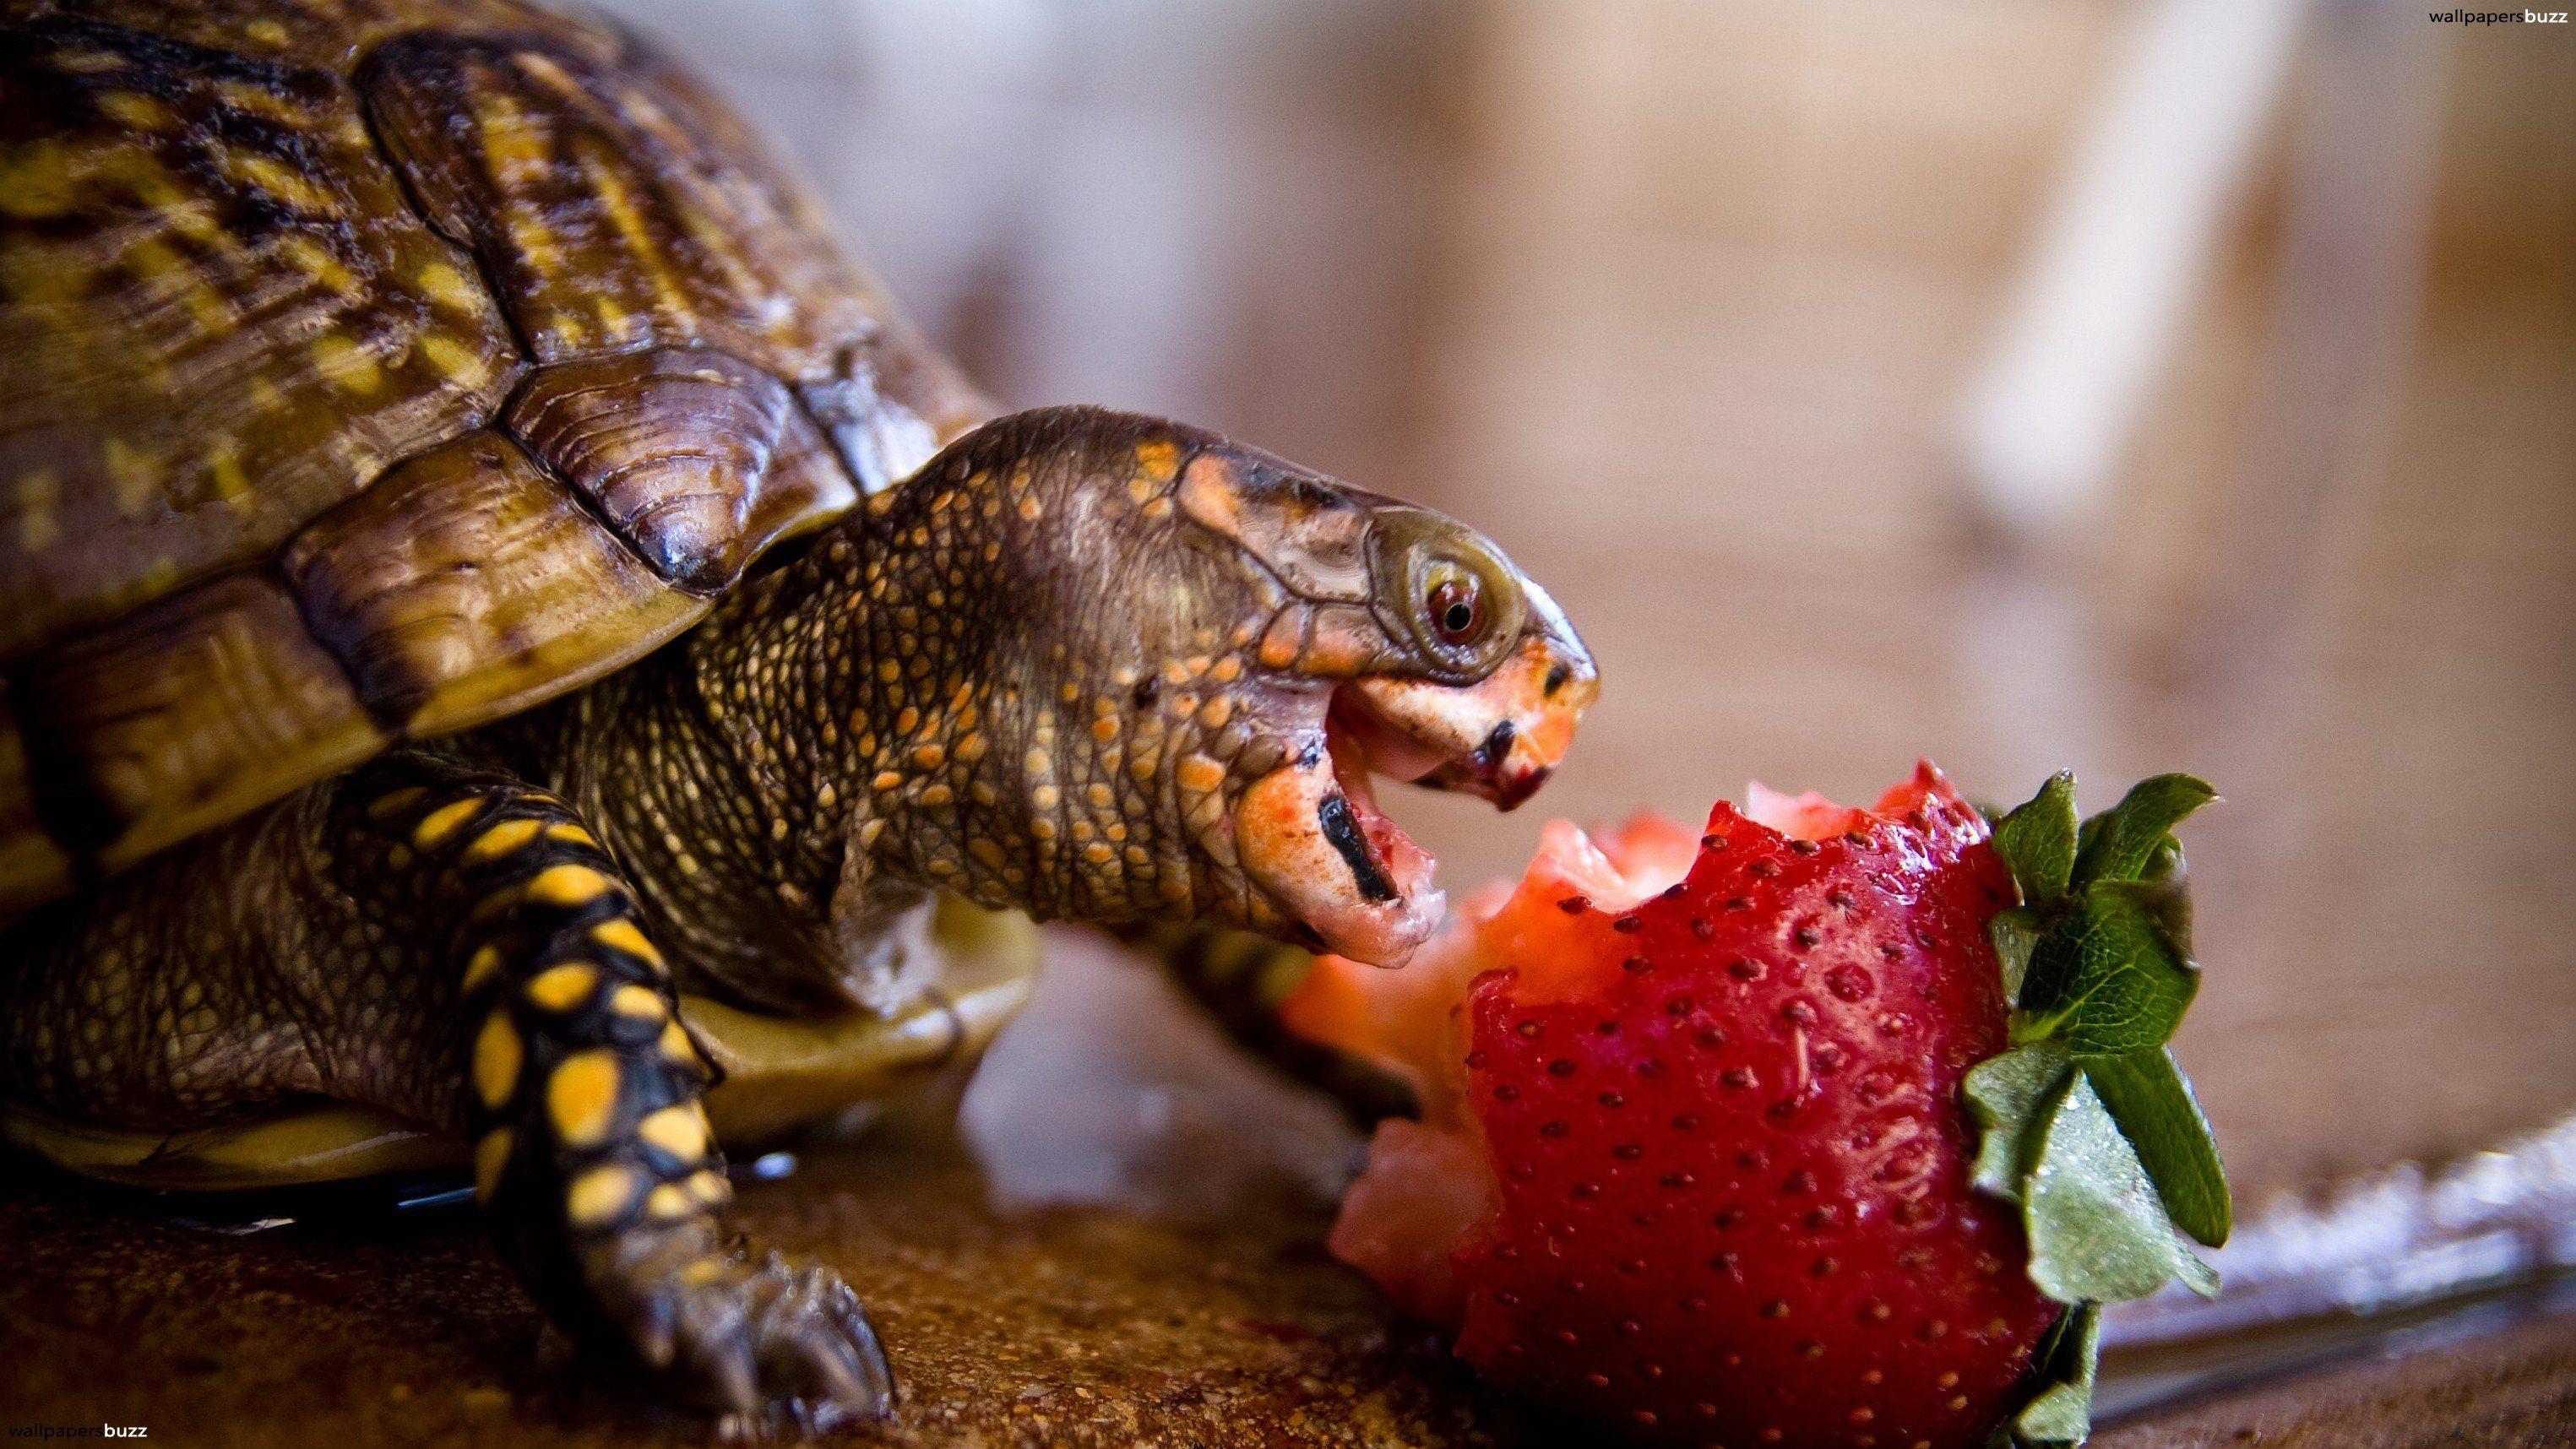 A turtle eating strawberry HD Wallpaper